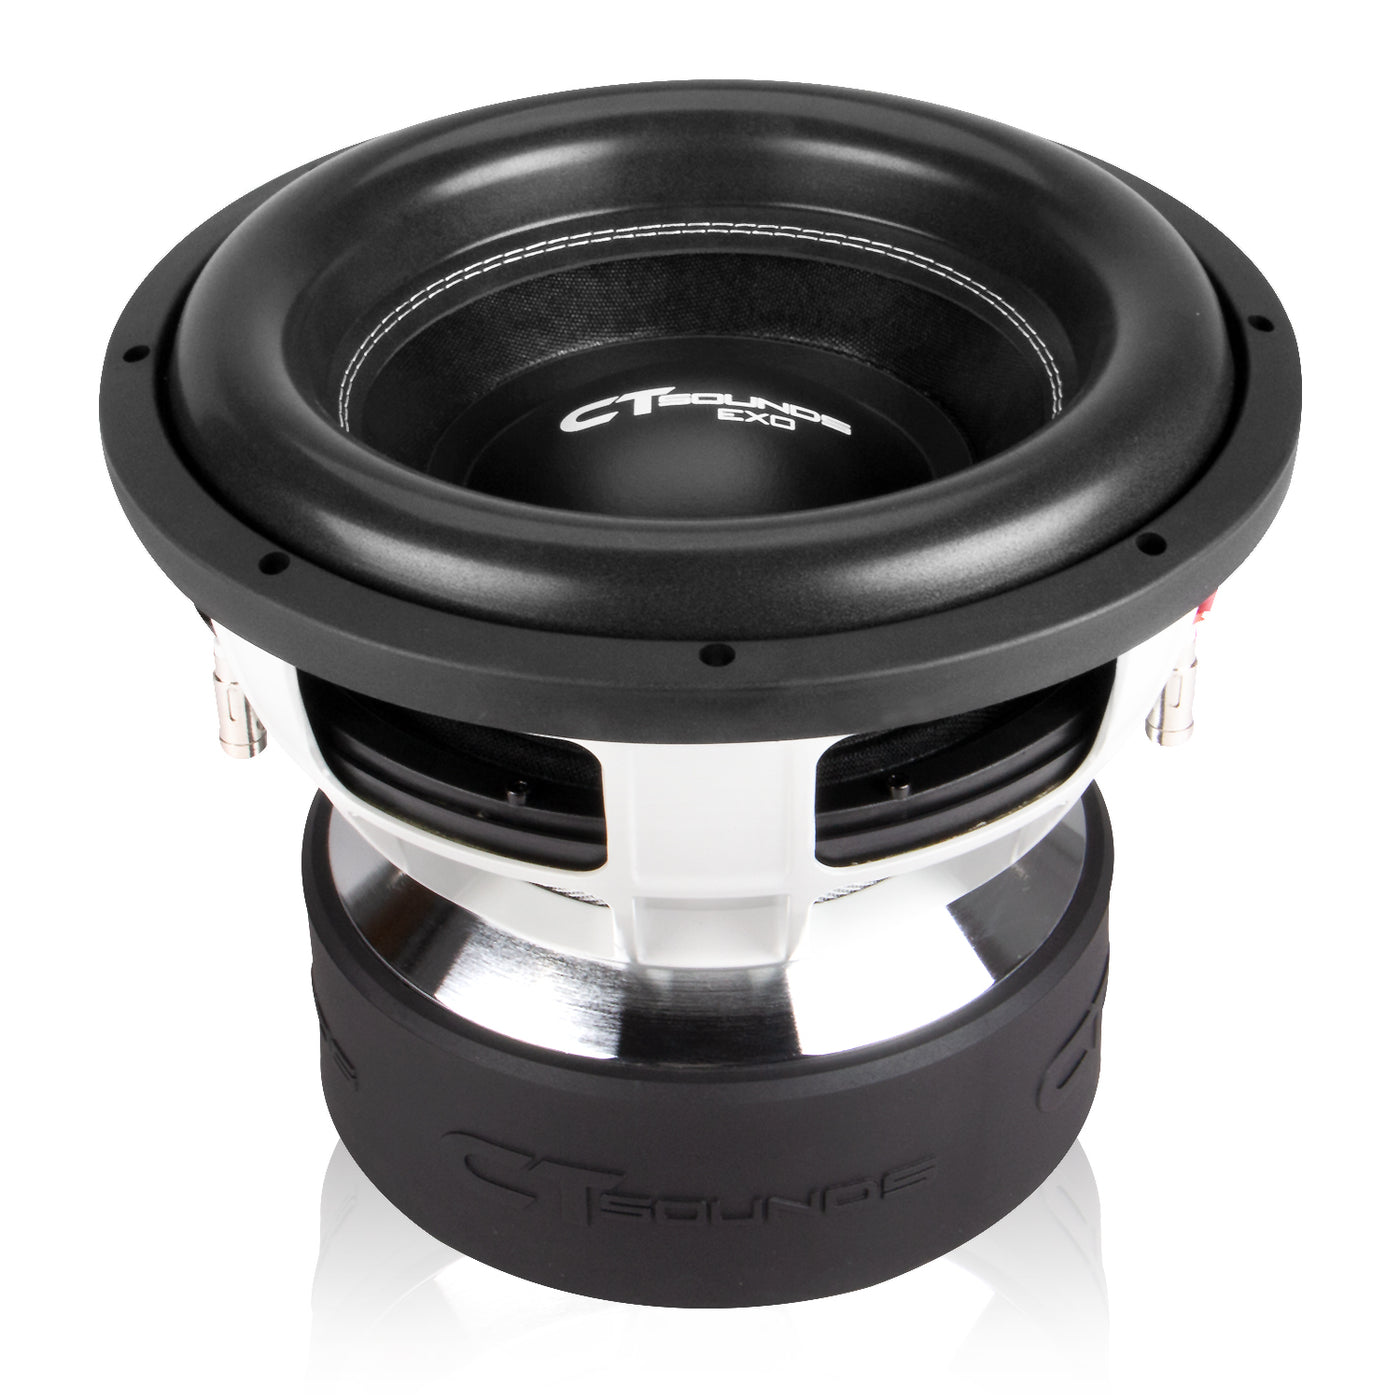 EXO-12 // 3000 Watts RMS 12 Inch Car Subwoofer